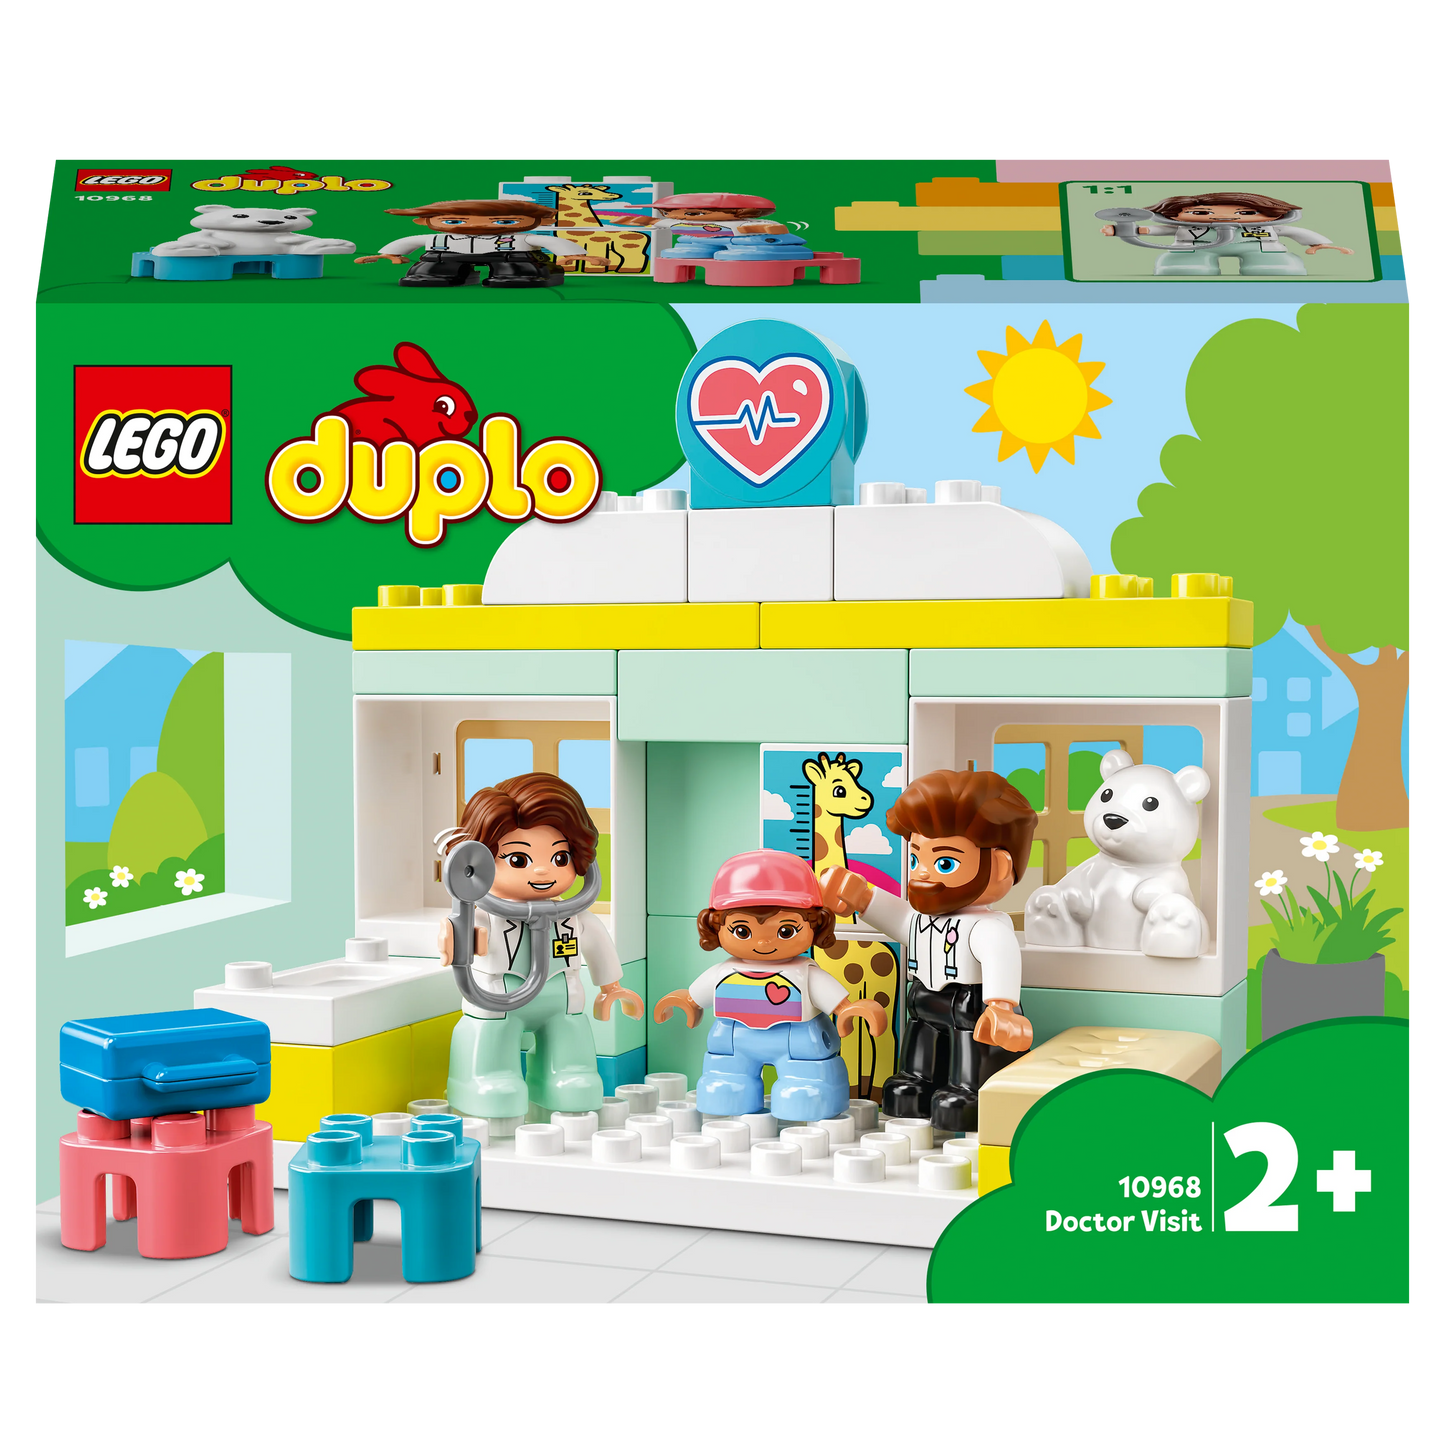 At the doctor-LEGO – Brugs